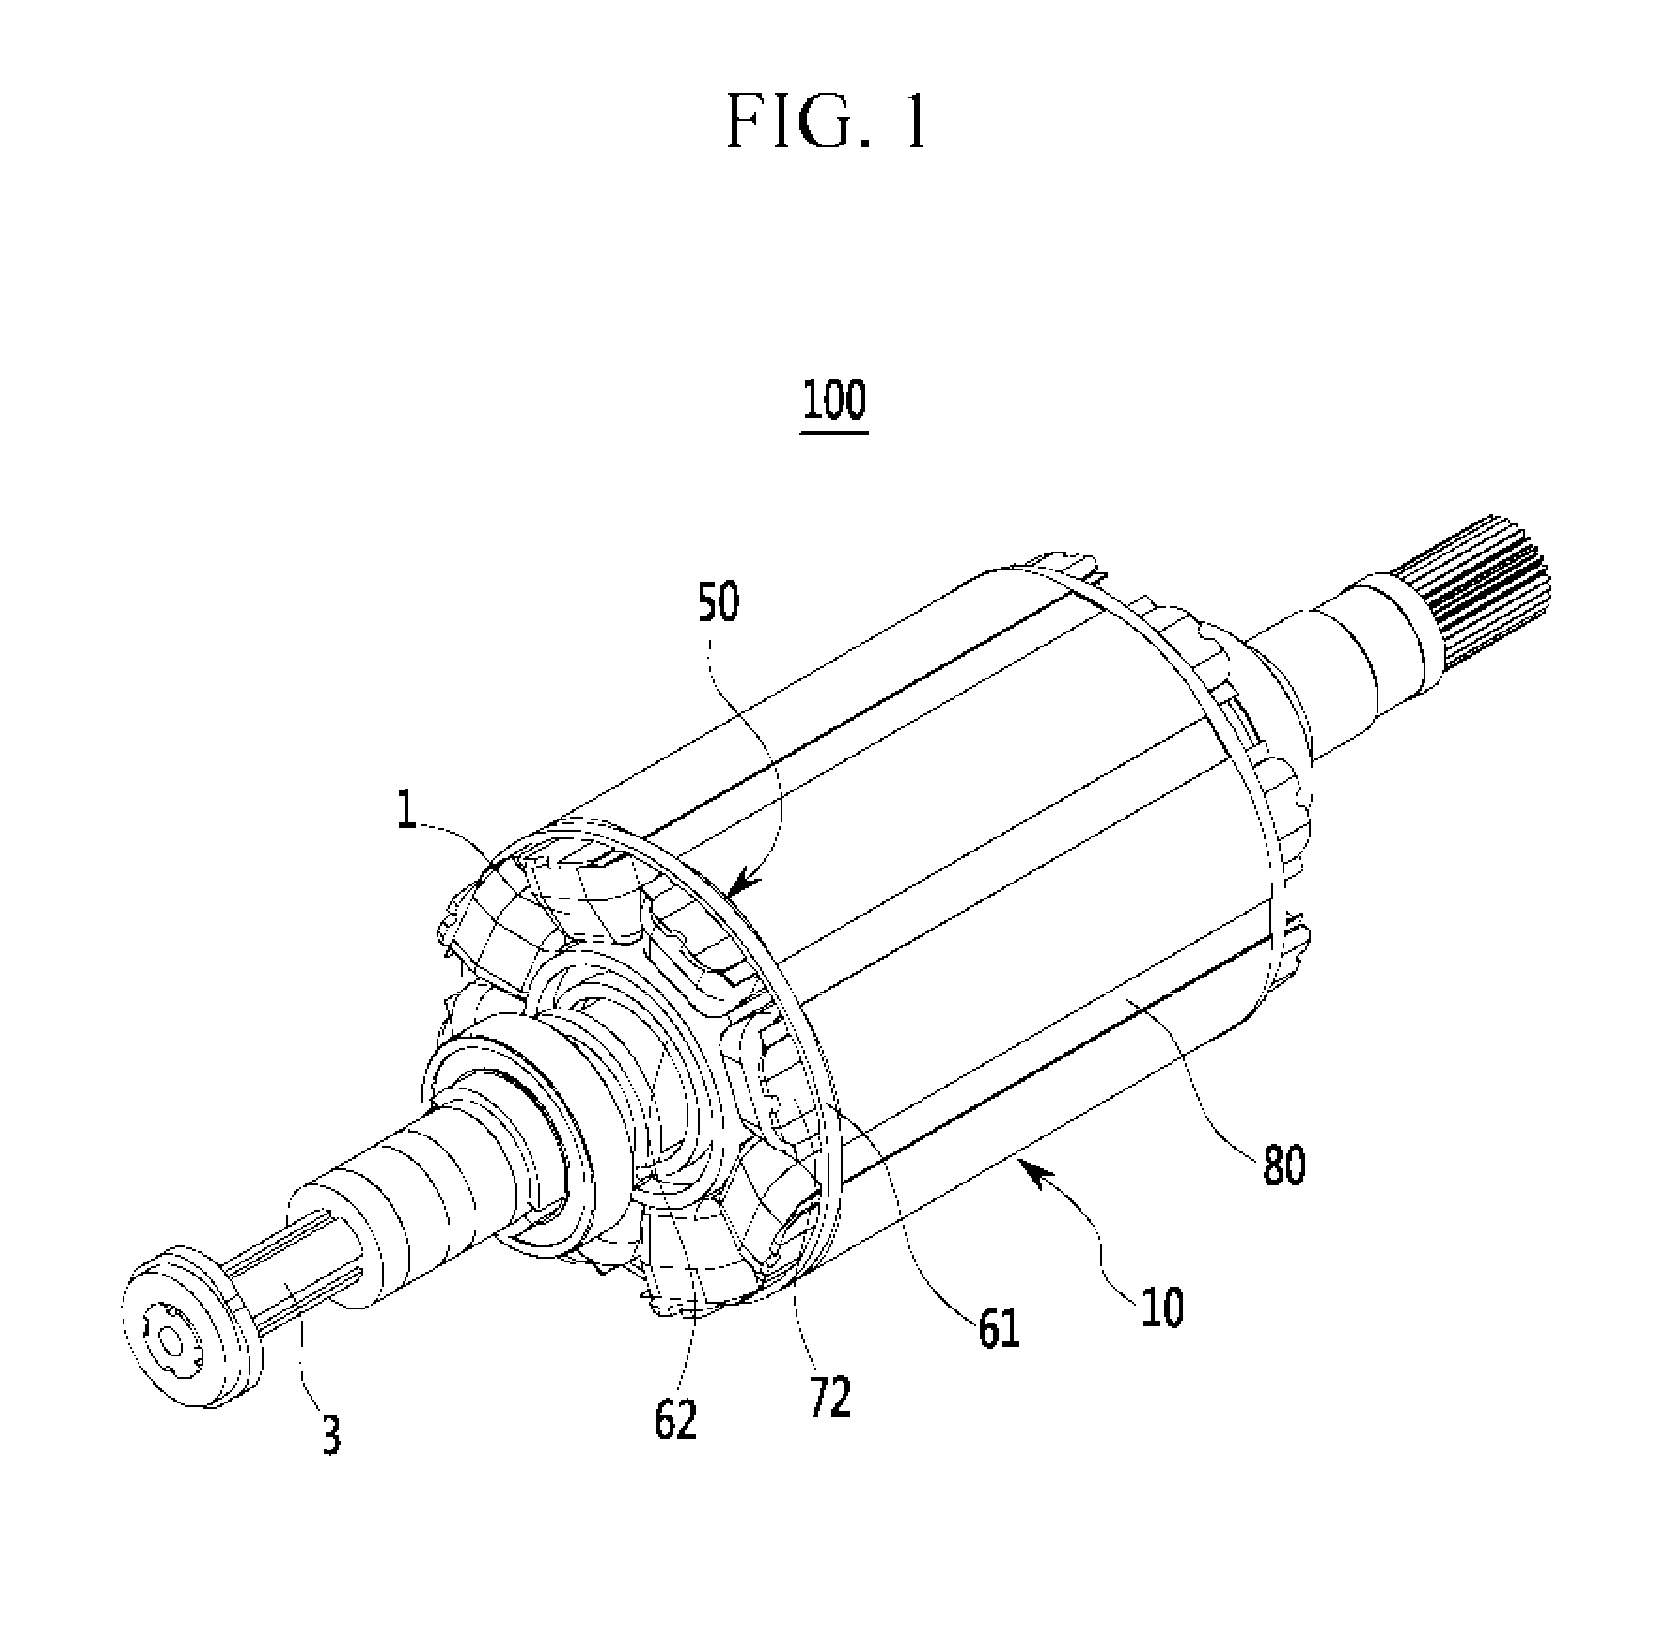 Rotor structure of wound rotor driving motor